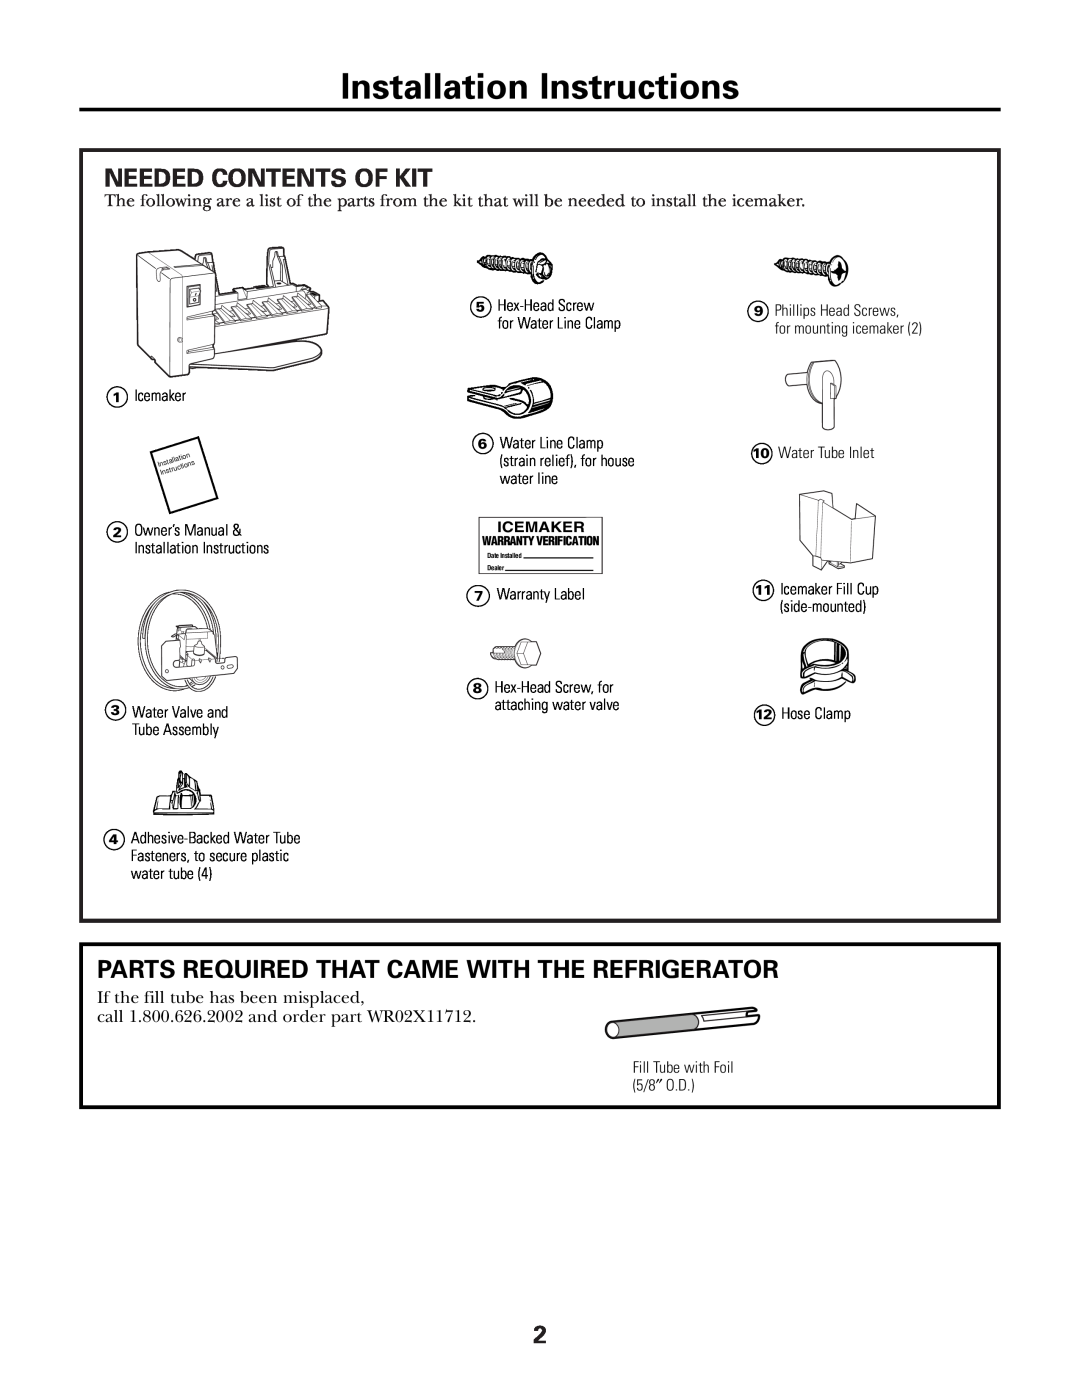 GE PDS22MB, PDS20SB Installation Instructions, Needed Contents Of Kit, Parts Required That Came With The Refrigerator 